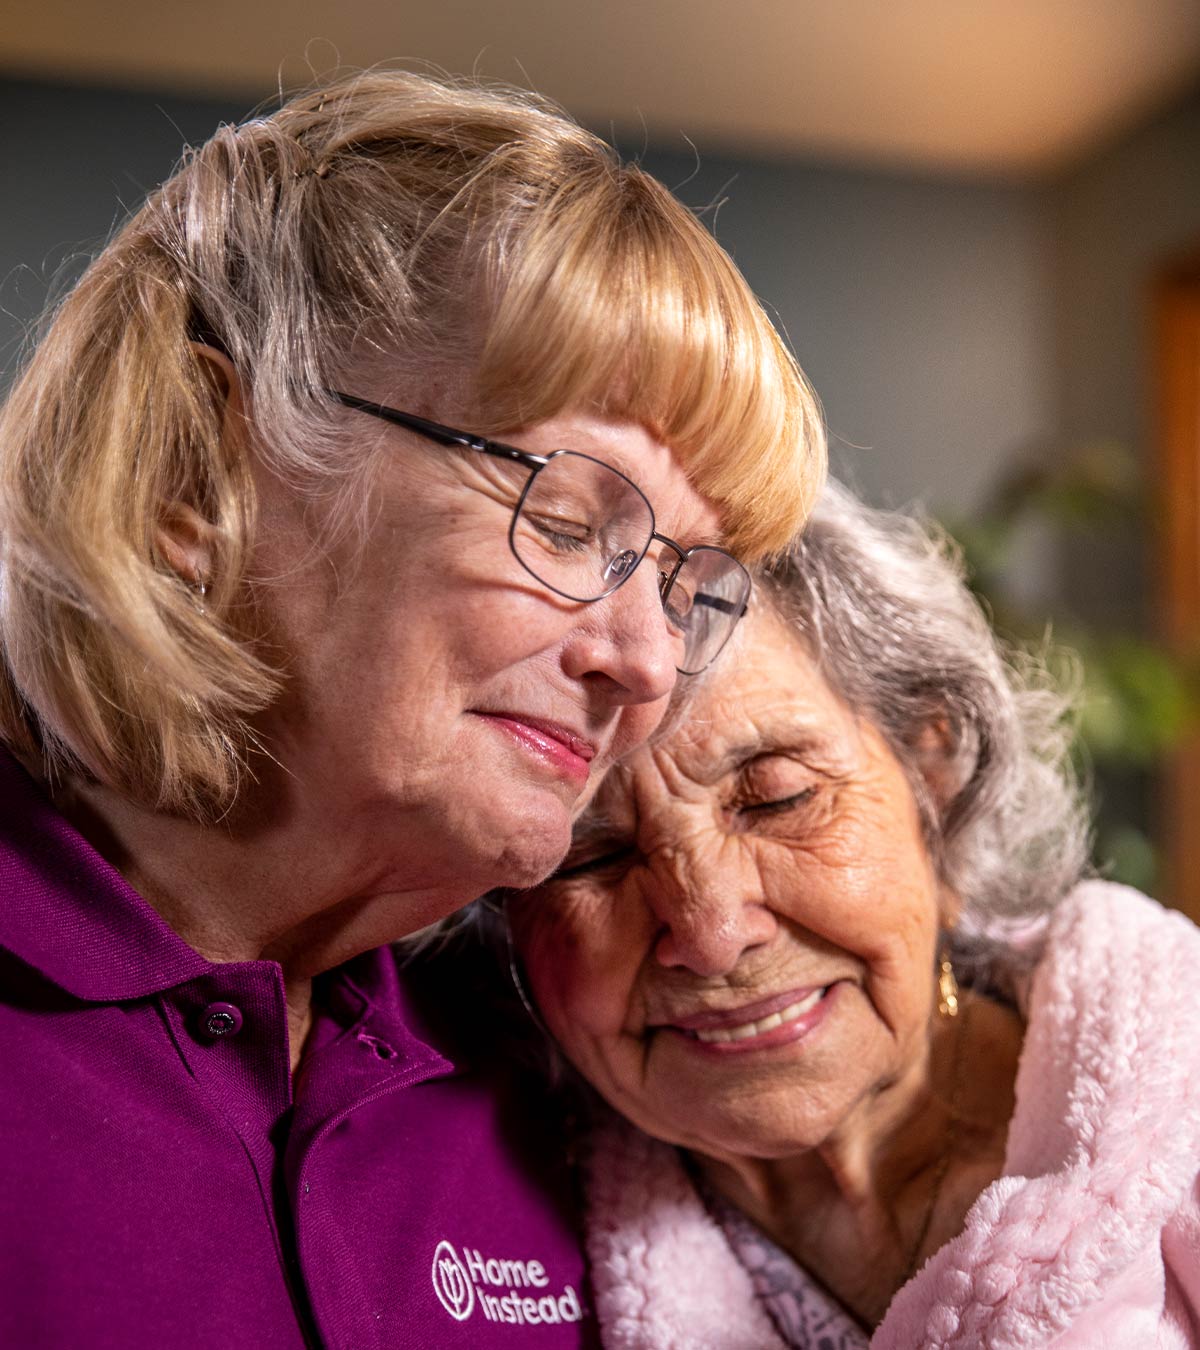 CAREGiver providing in-home senior care services. Home Instead of Edmonton, AB provides Elder Care to aging adults. 